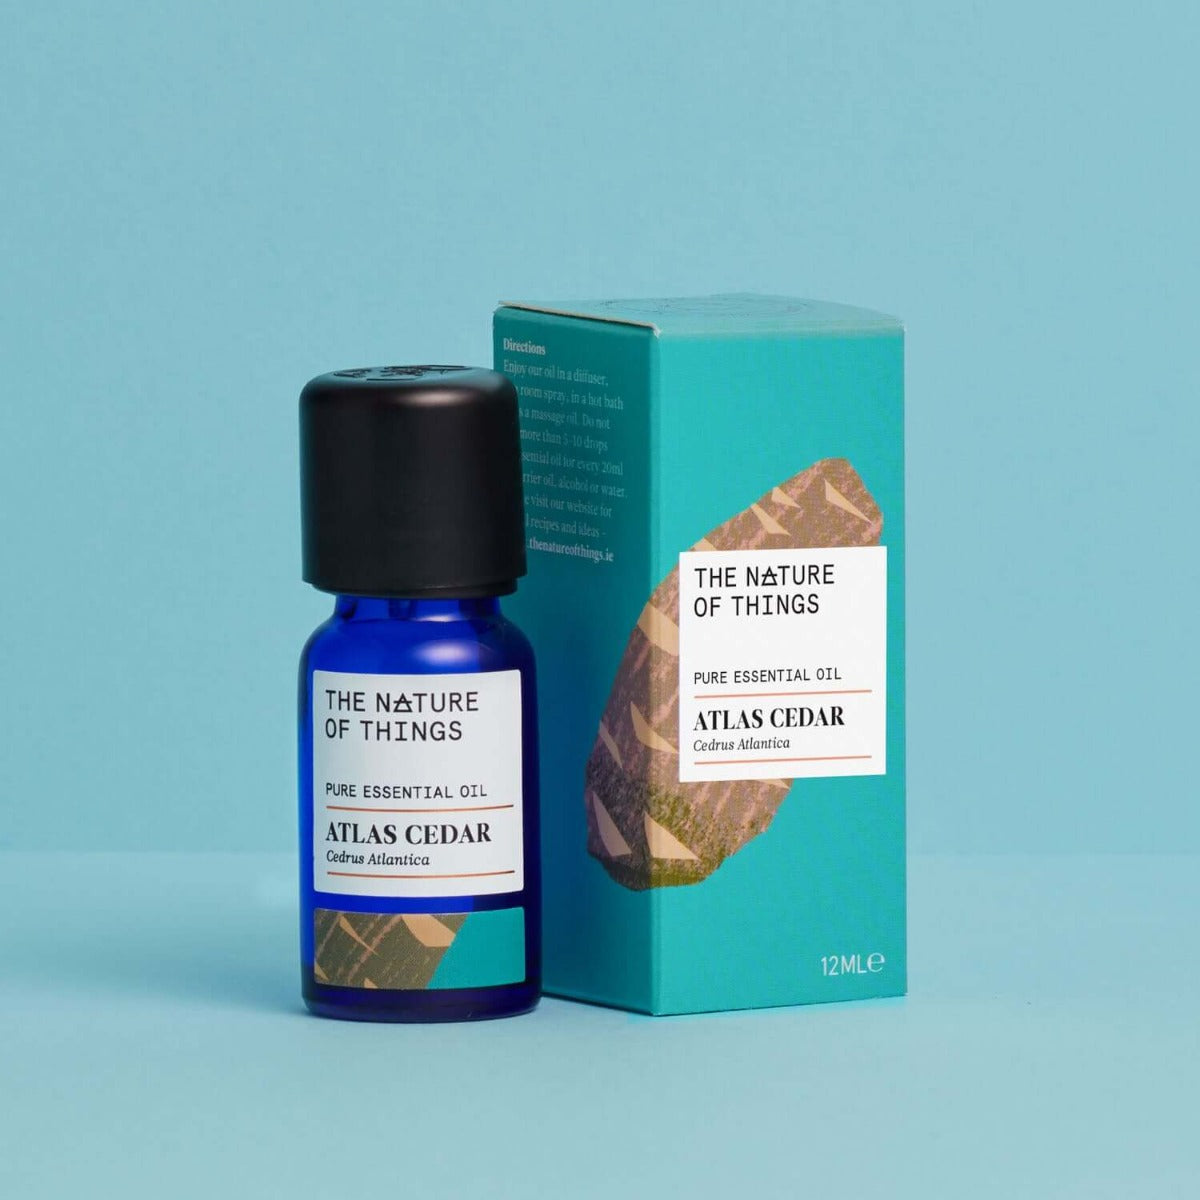 Cedar Atlas Essential Oil from The Nature of Things